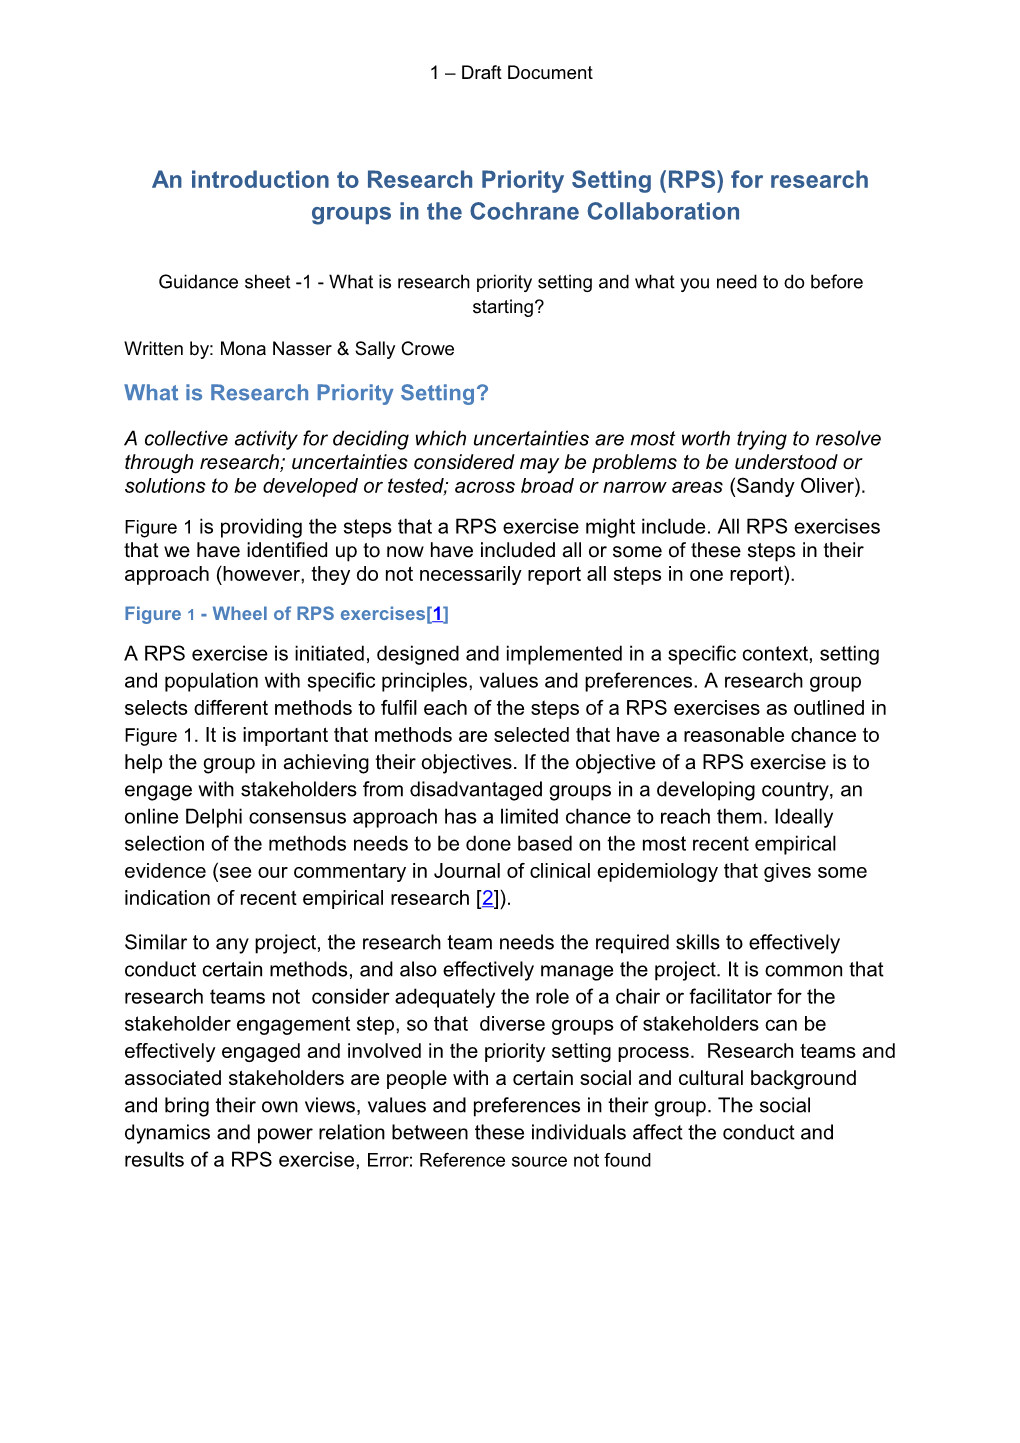 An Introduction to Research Priority Setting (RPS) for Research Groups in the Cochrane